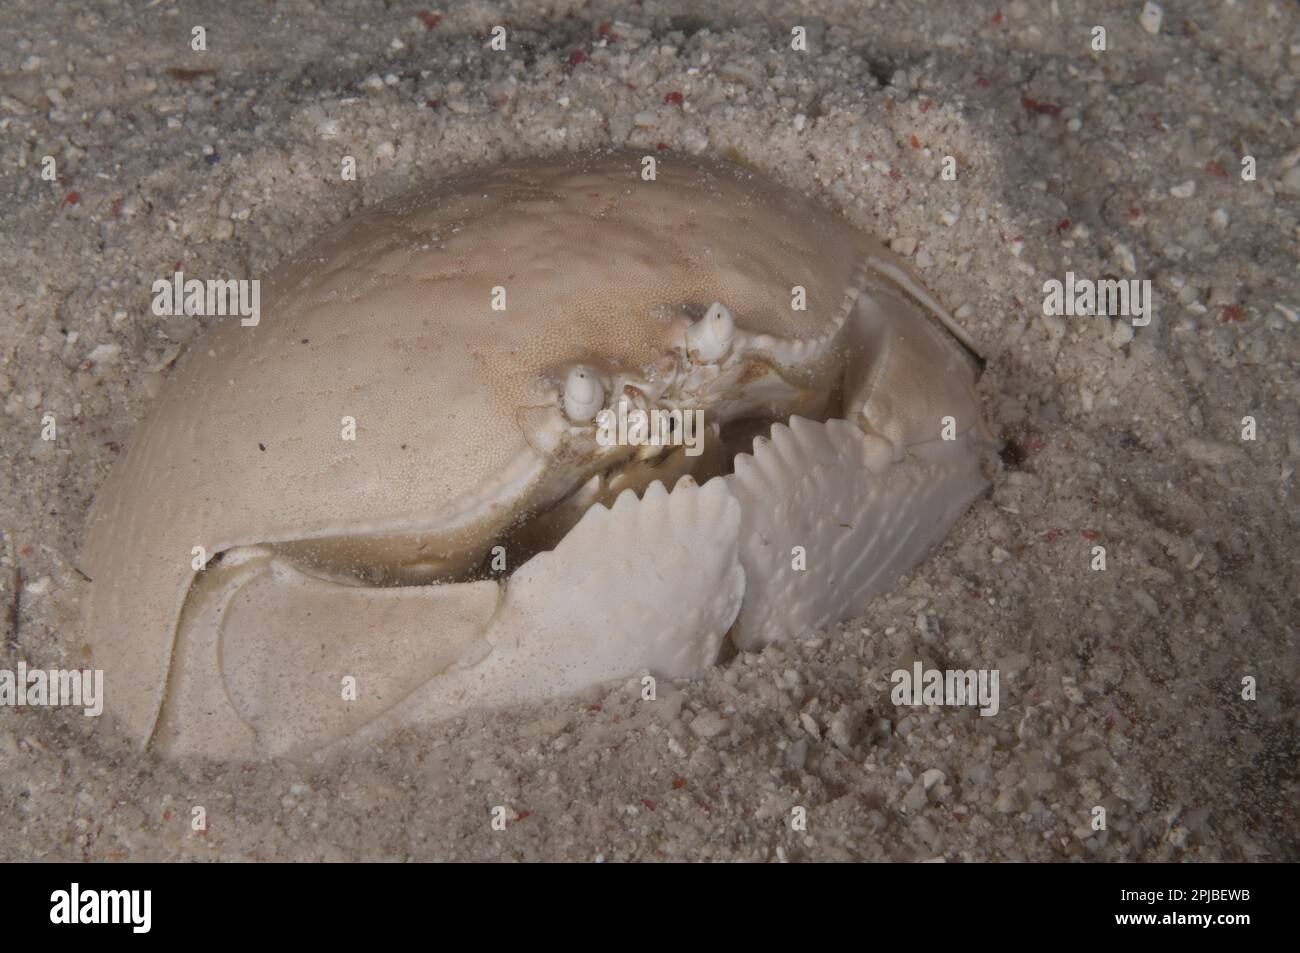 Spotted pubic crab, smooth box crabs (Calappa calappa), Other animals, Crabs, Crustaceans, Animals, Box crab adult, buried in sand, Mabul Island Stock Photo